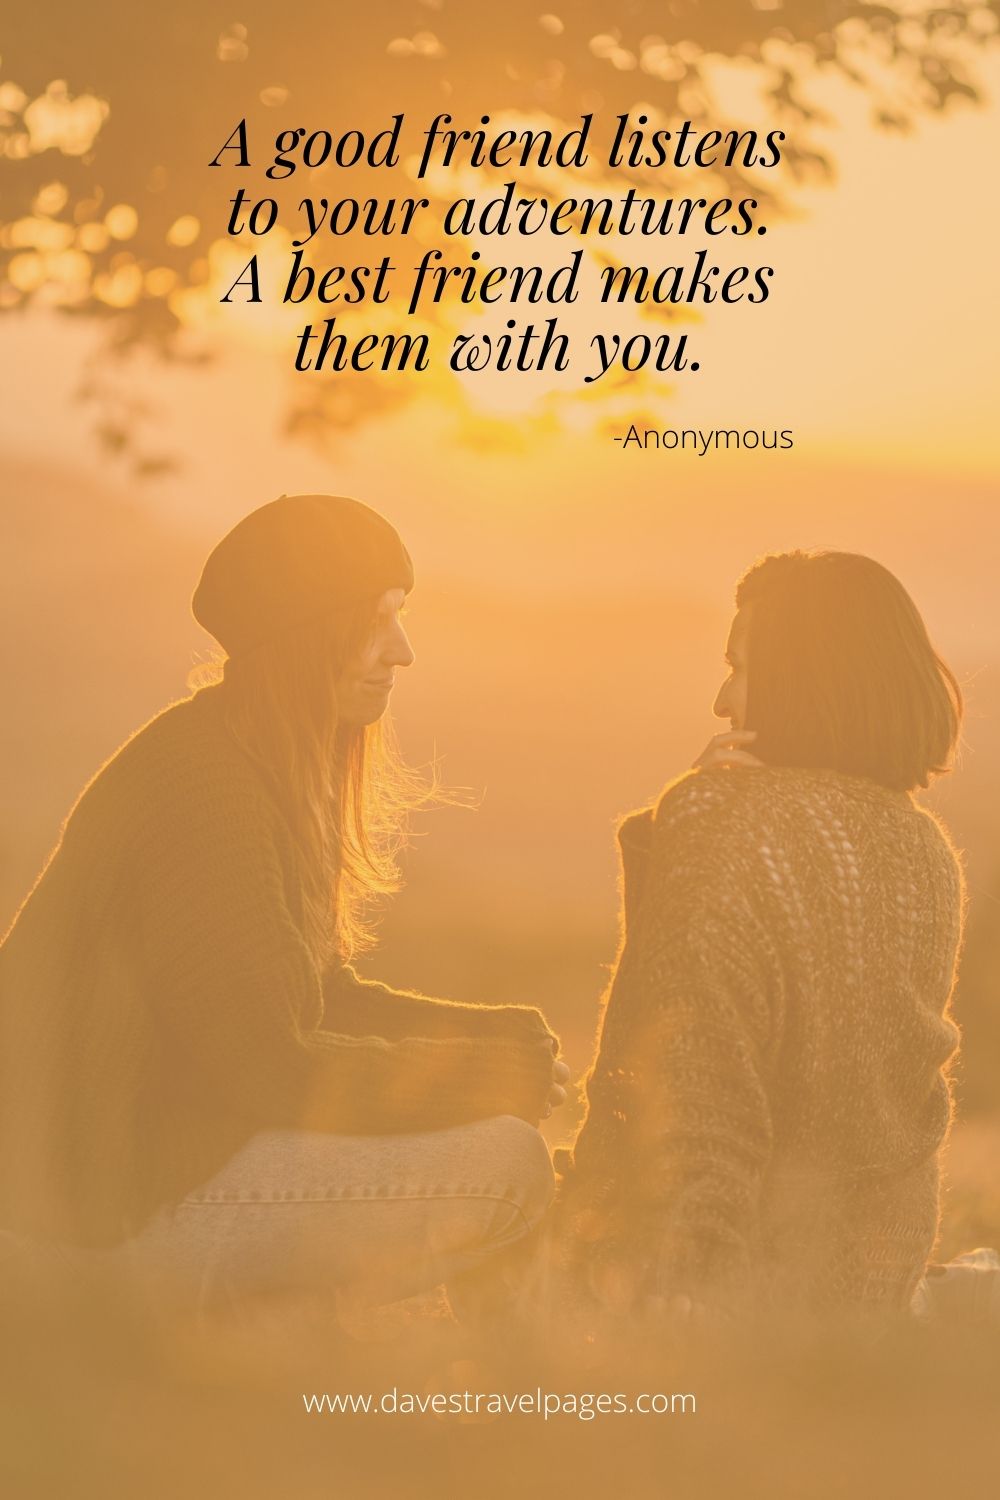 A good friend listens to your adventures. A best friend makes them with you.